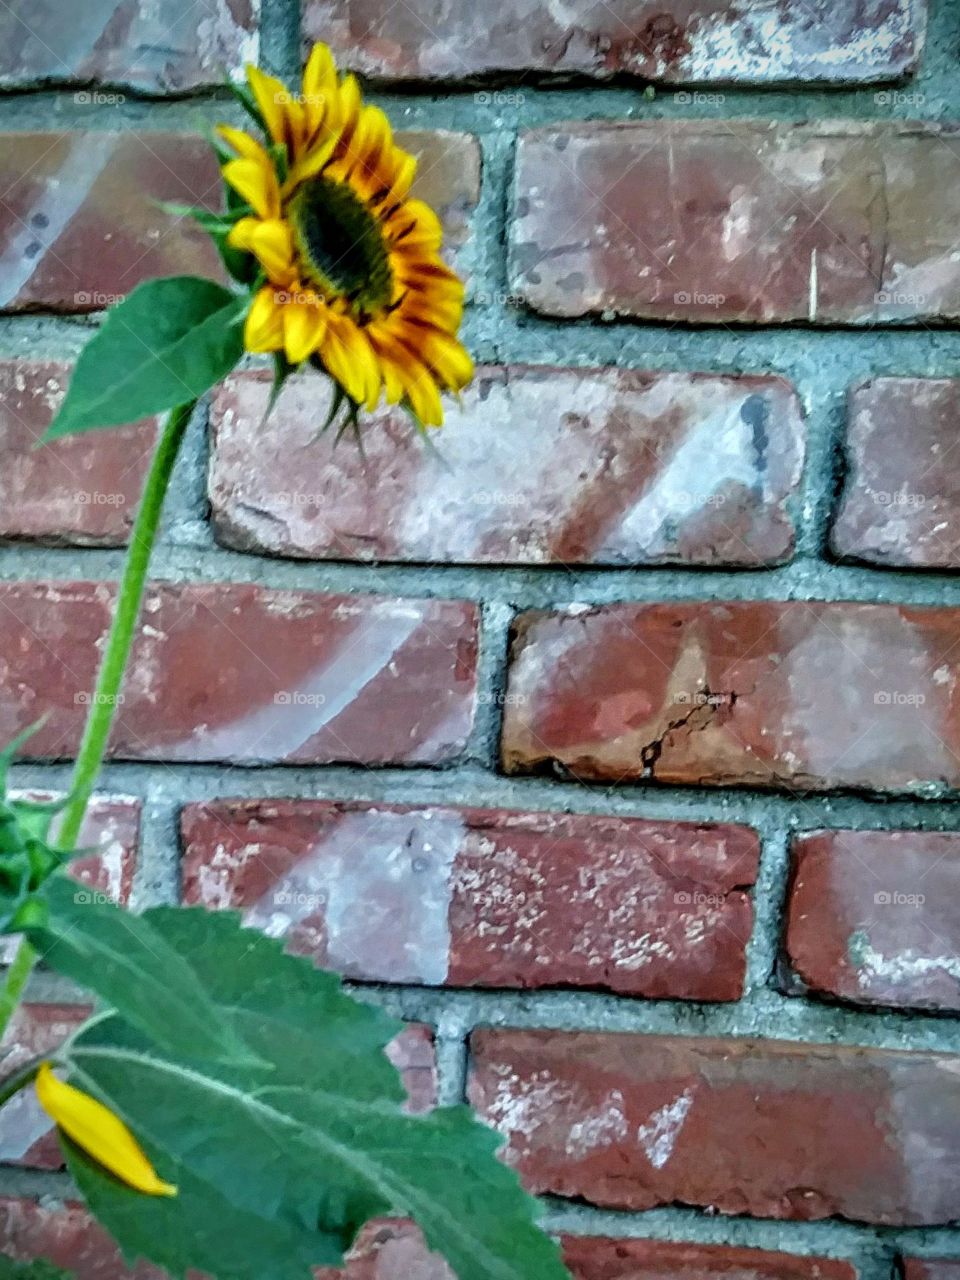 Sunflower on the wall